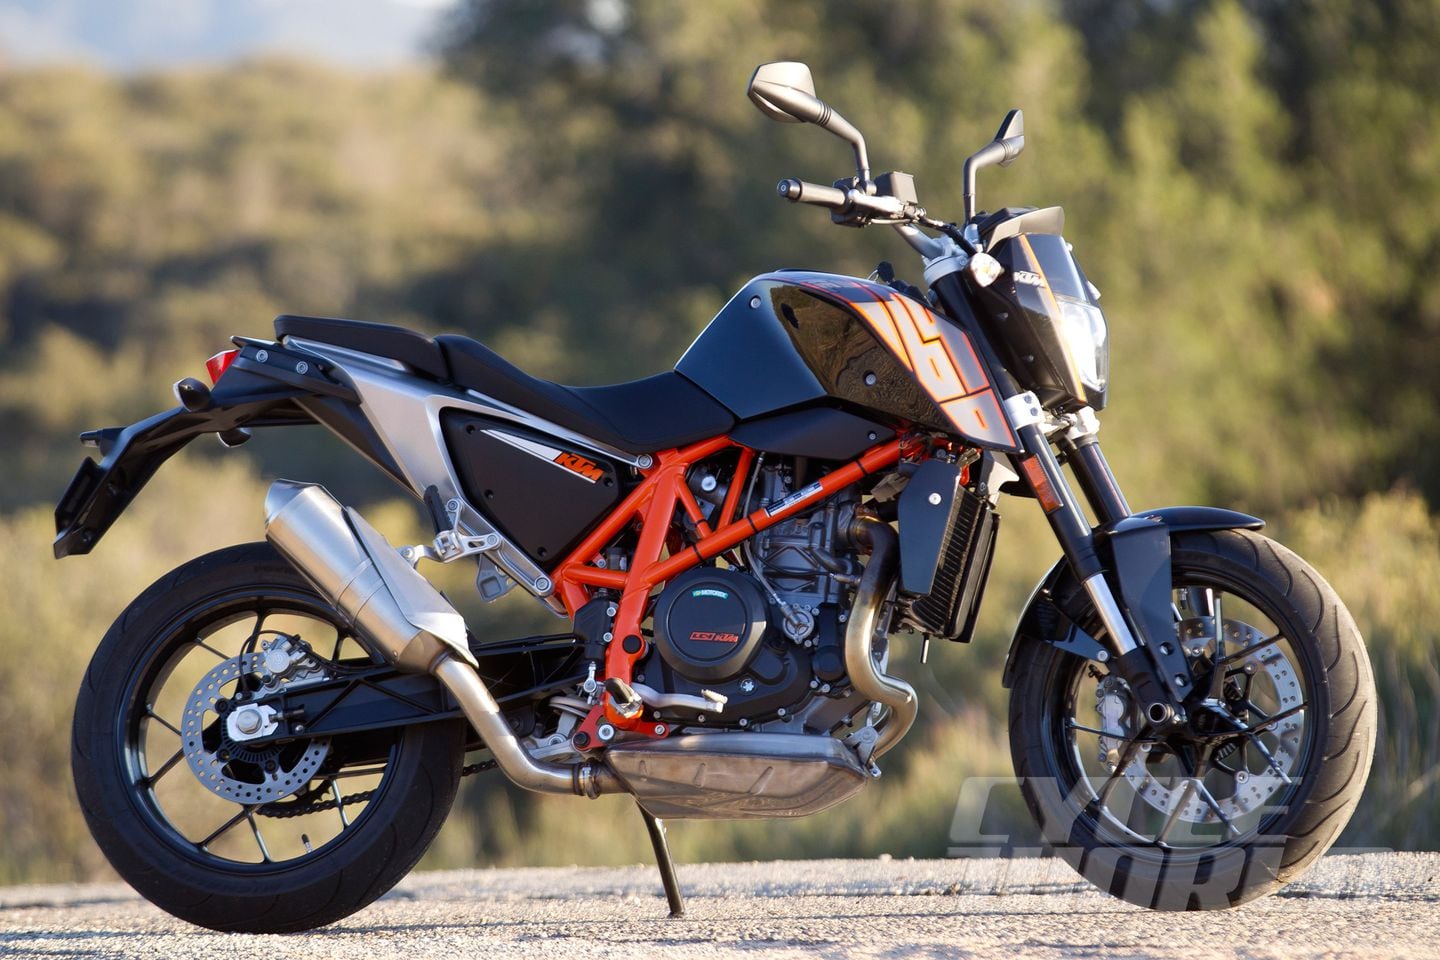 Ktm 690 Duke First Ride Review- Photos | Cycle World